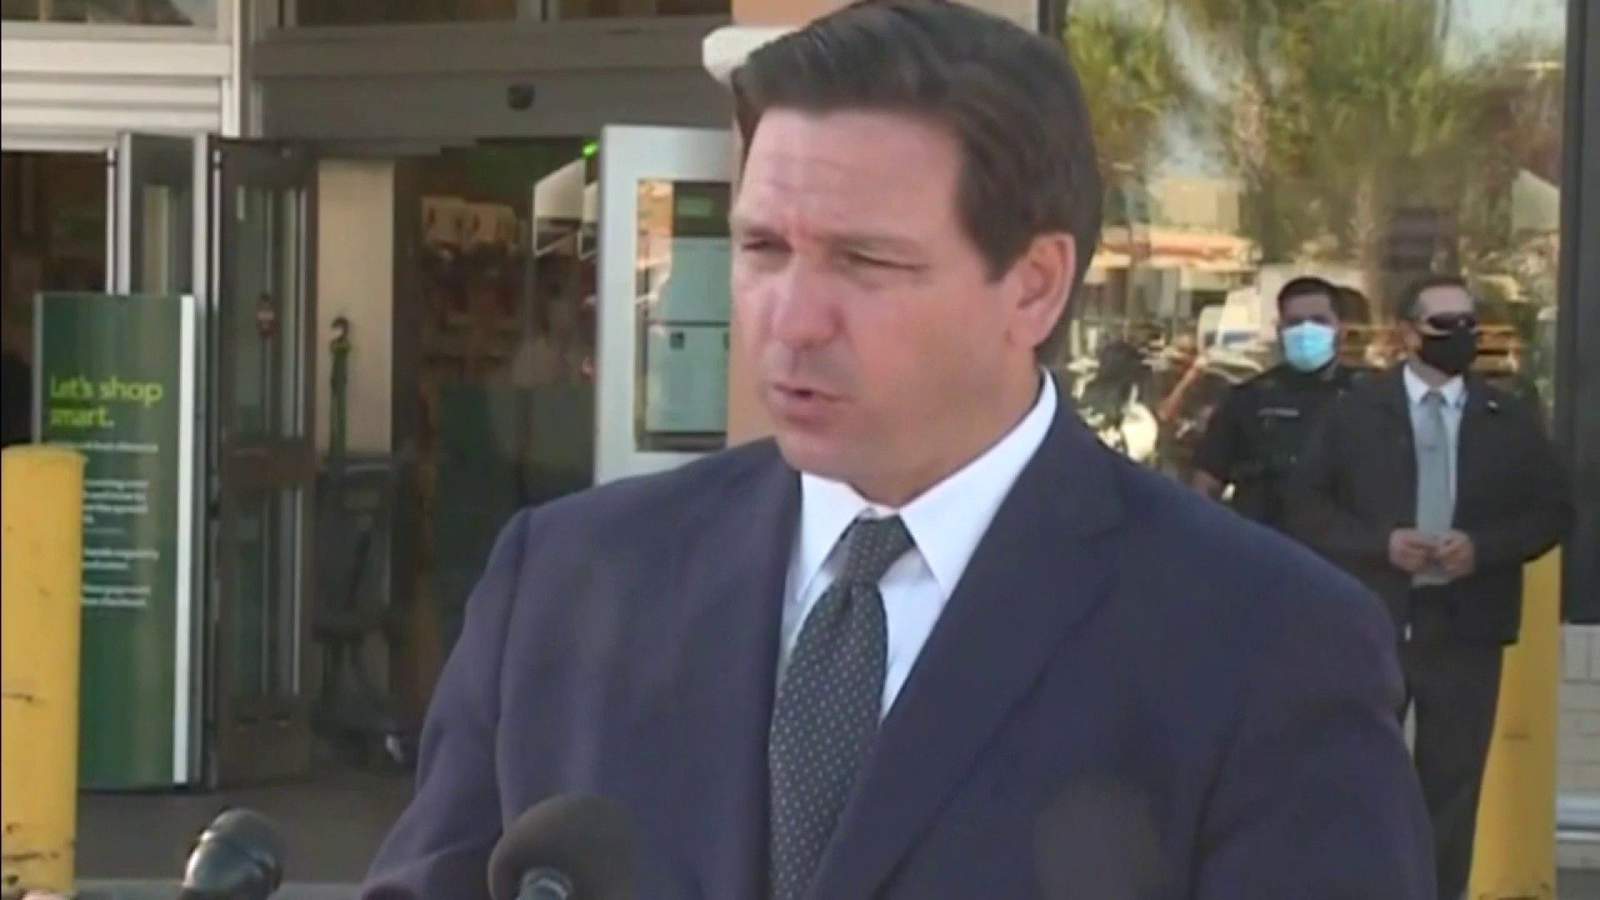 WATCH LIVE: Gov. Ron DeSantis holds news conference in Panama City